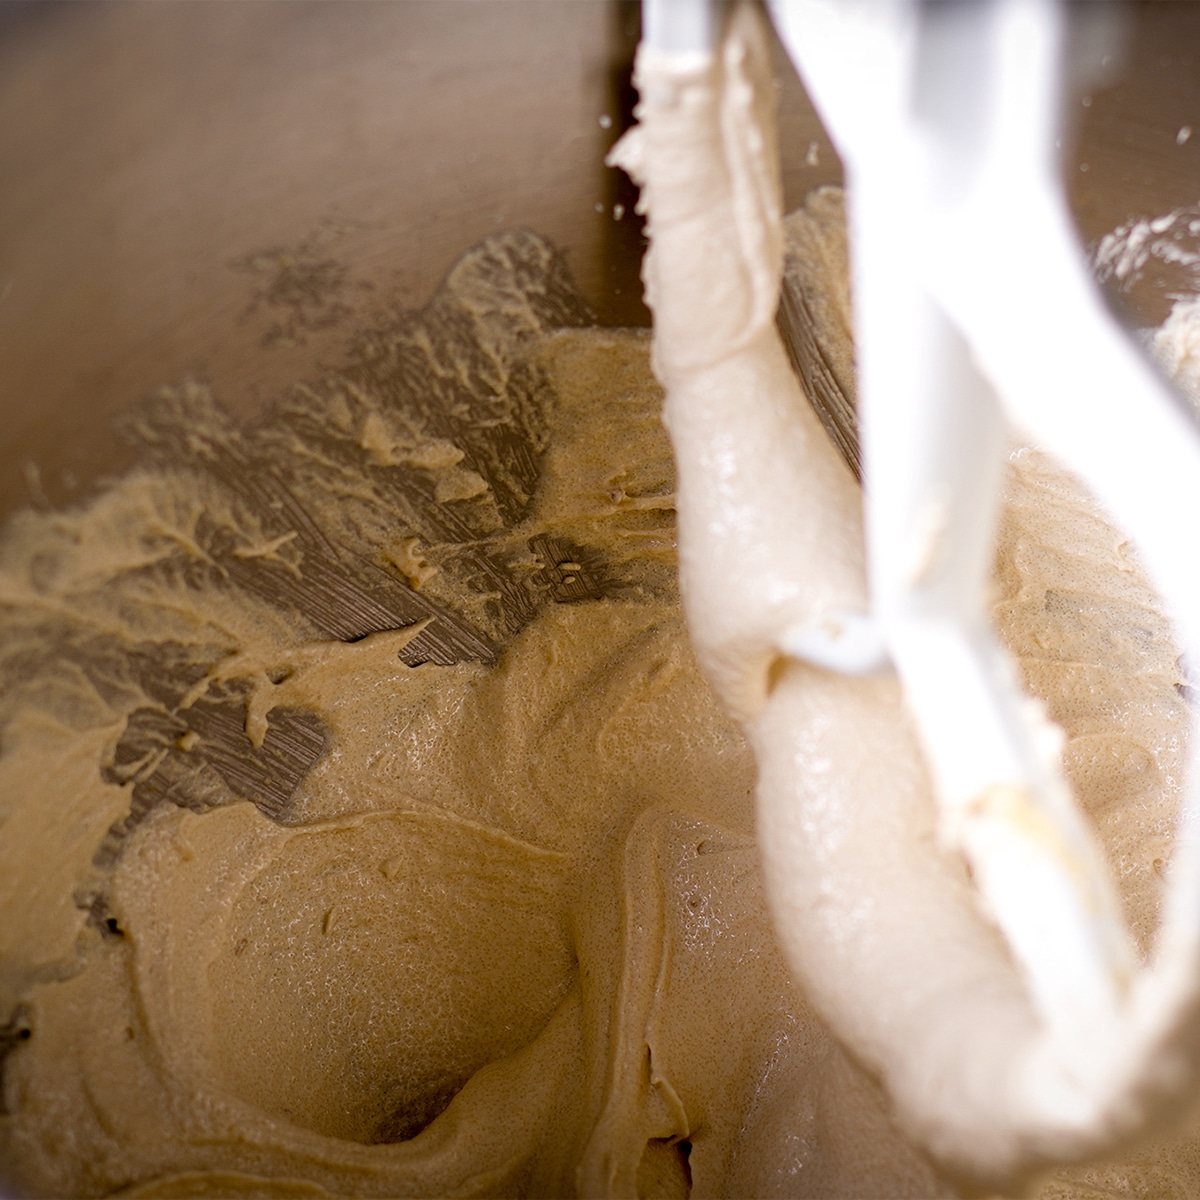 Using an electric mixer to beat butter, oil, and brown sugar.